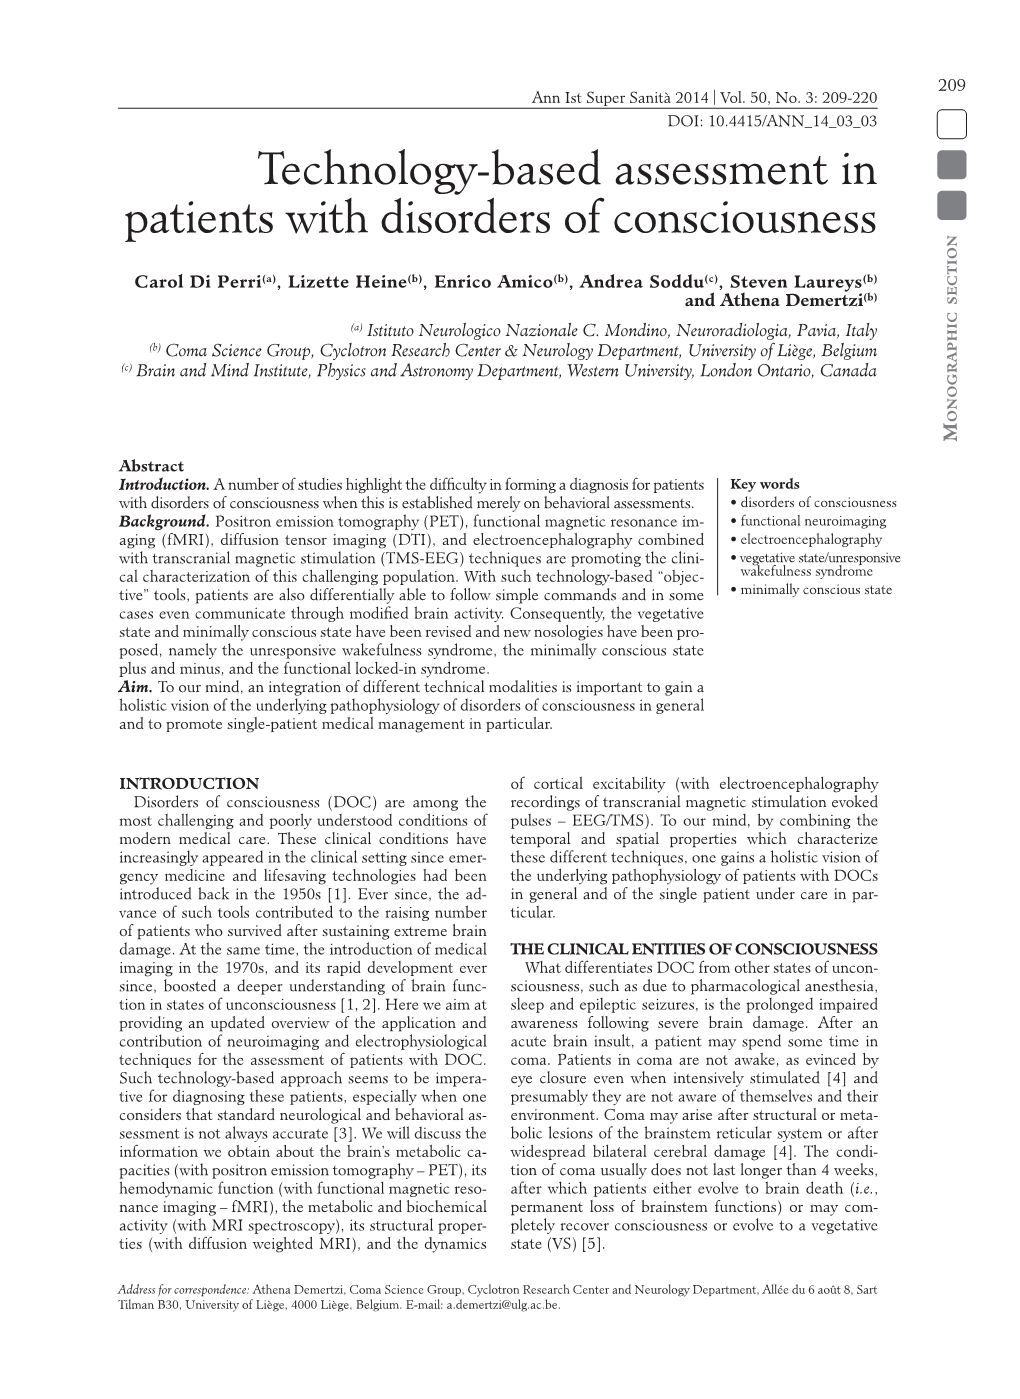 Technology-Based Assessment in Patients with Disorders Of